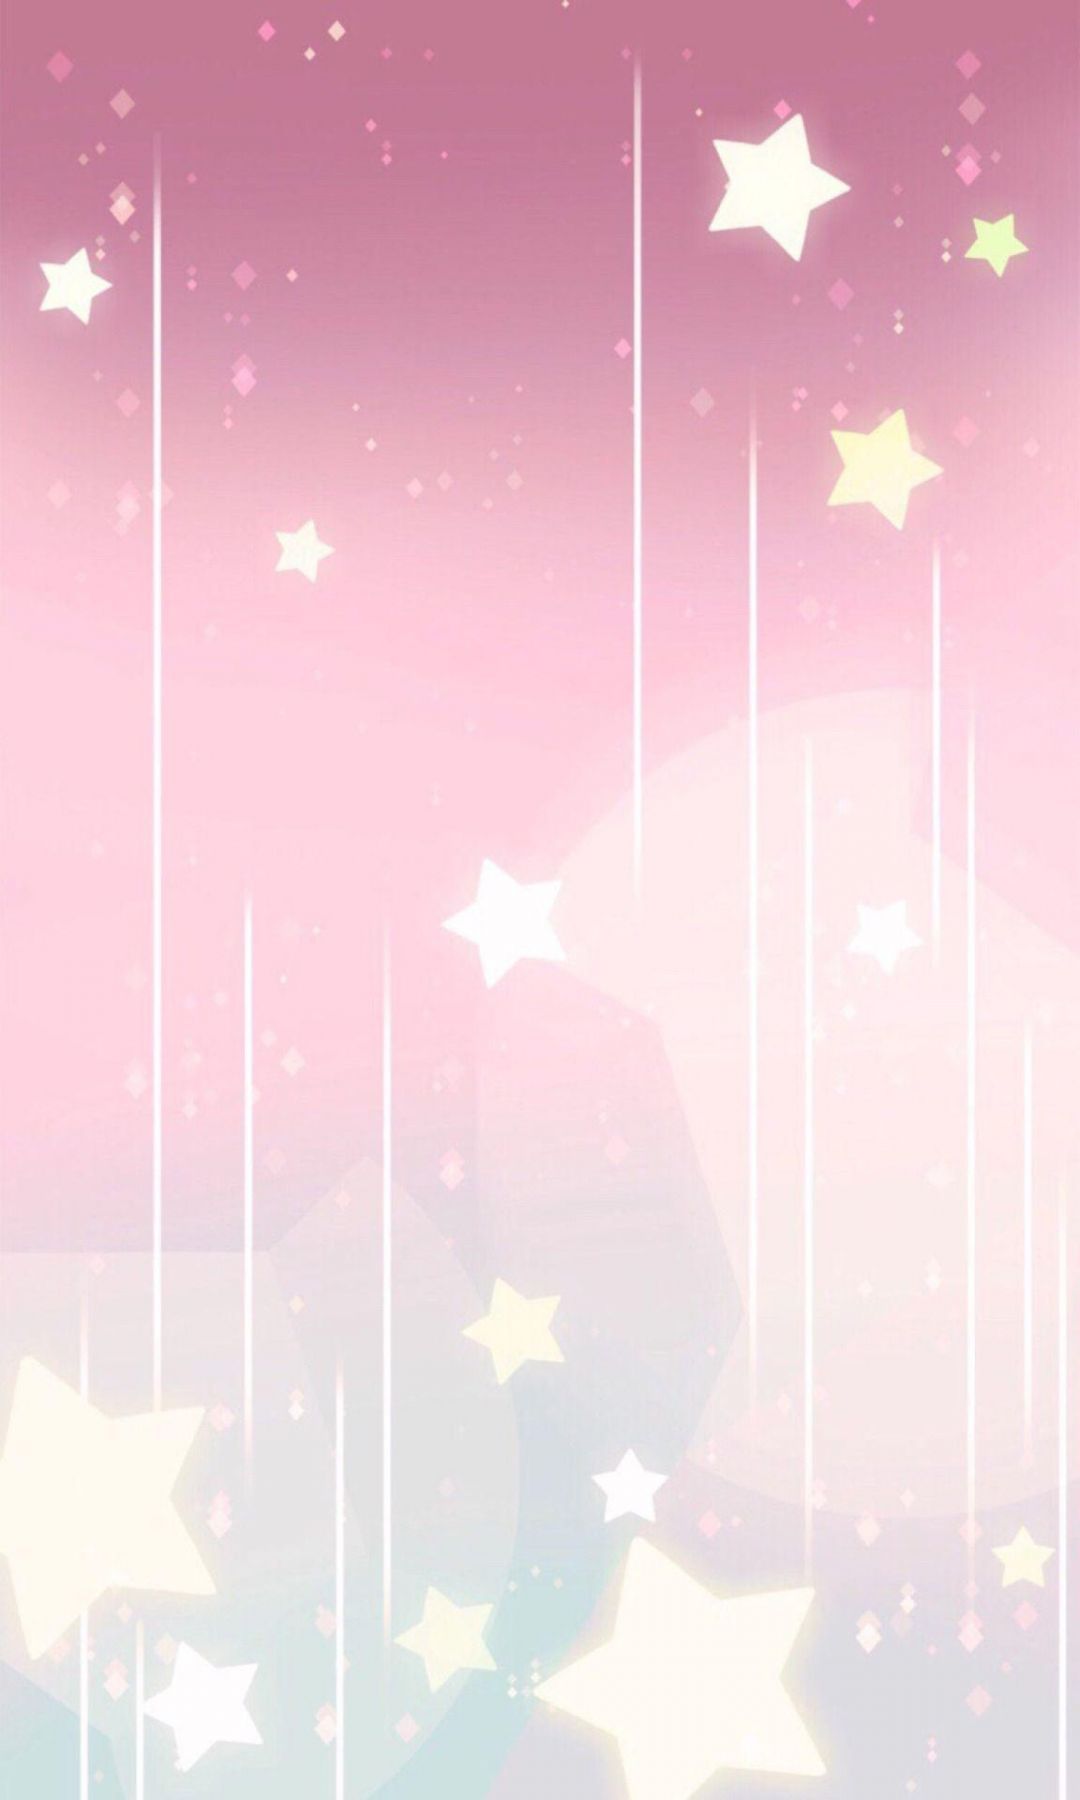 A pink and white starry background - Pink